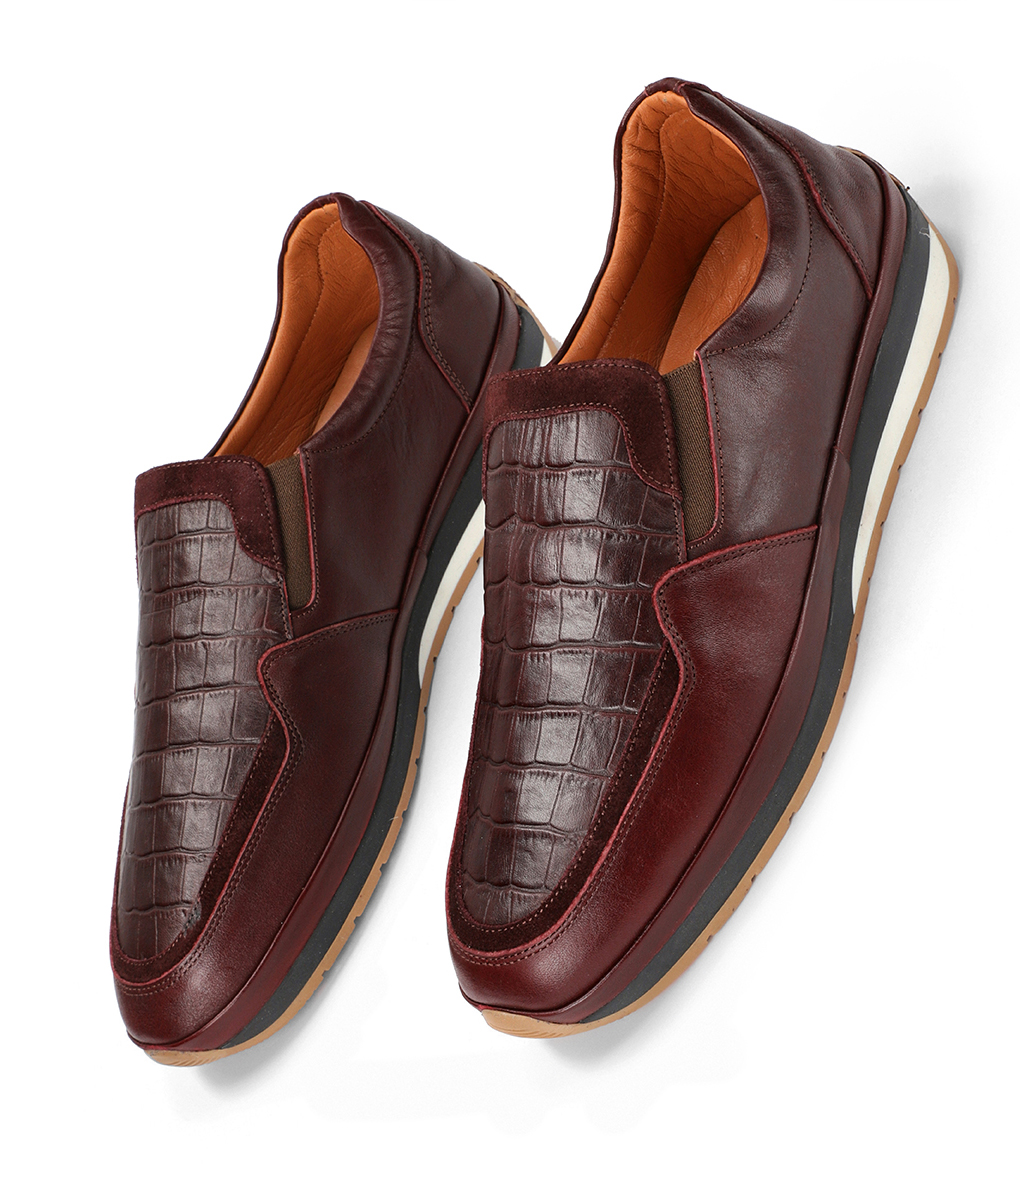 Burnished Maroon Crocodile Style Leather Shoes for Men